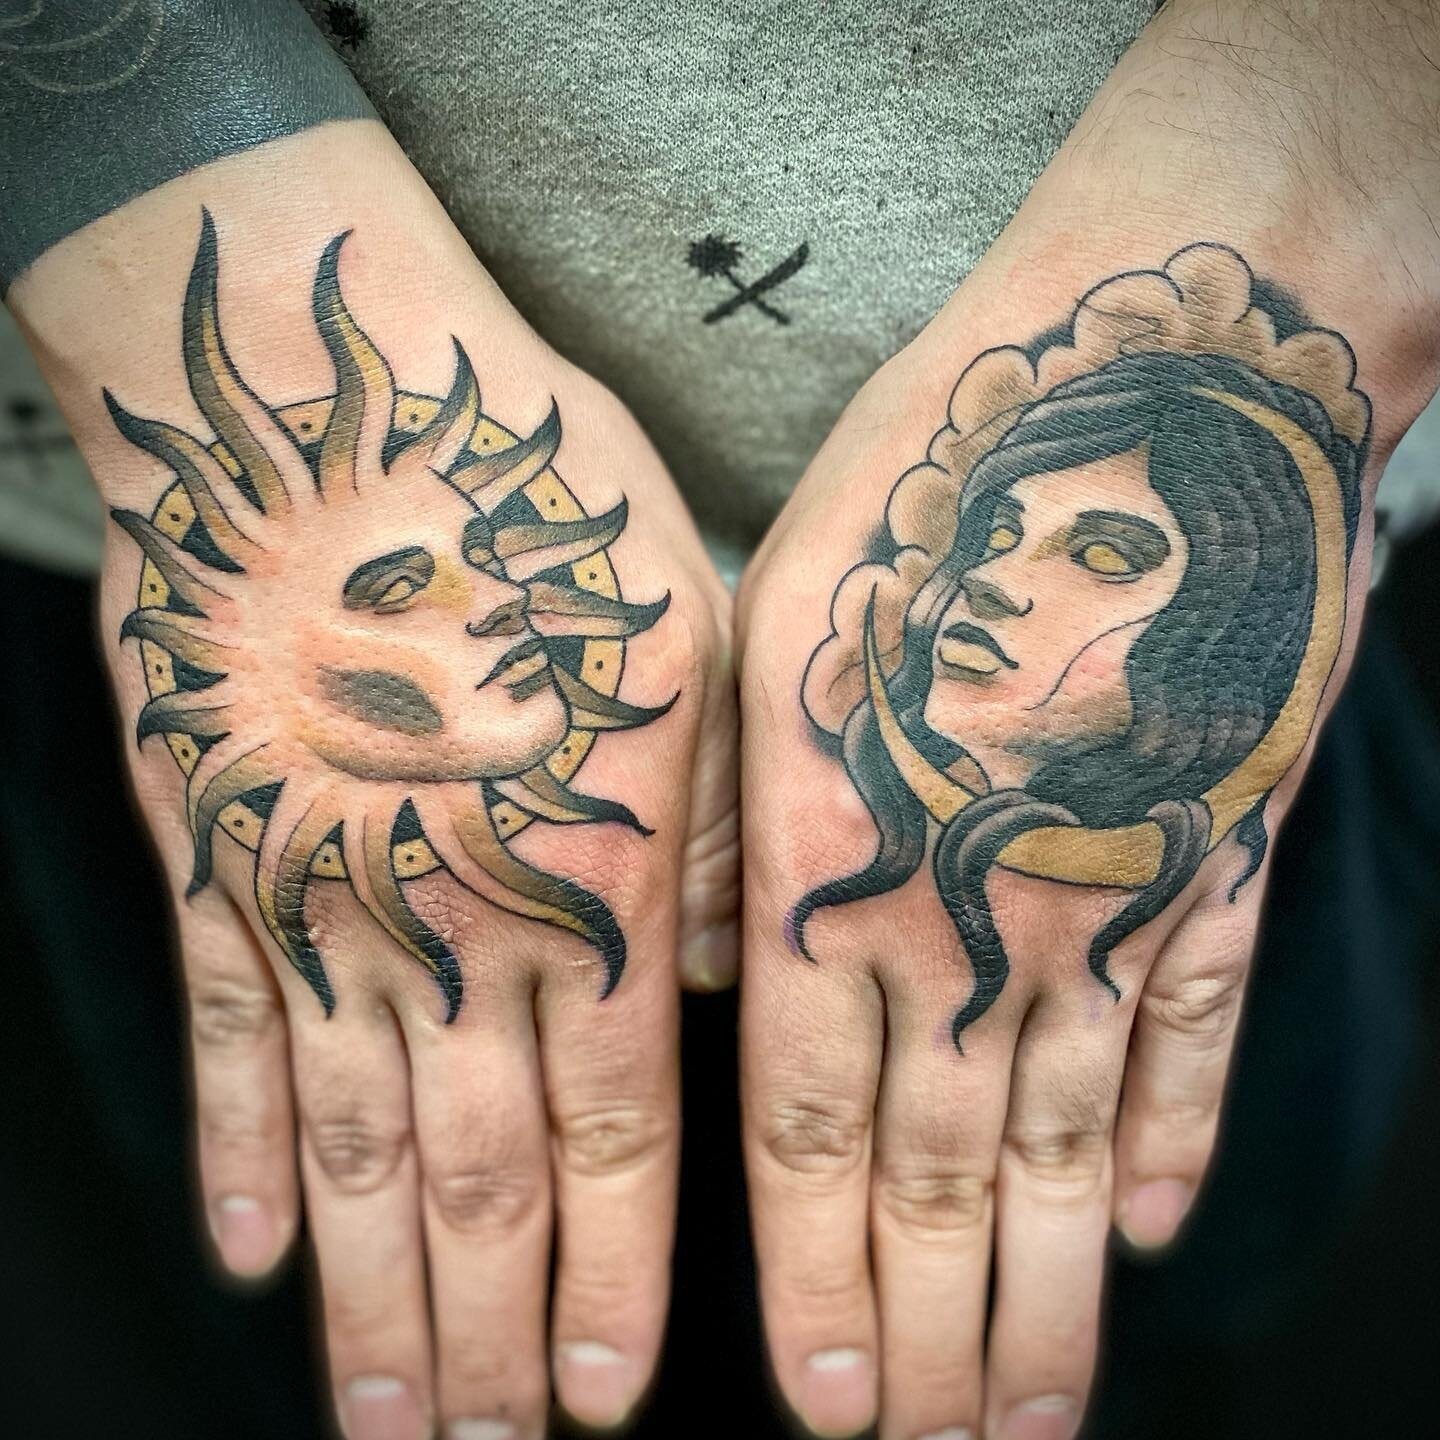 #Repost @trottertattoo​
Sun and Moon for Minh. Thanks for the freedom! ​